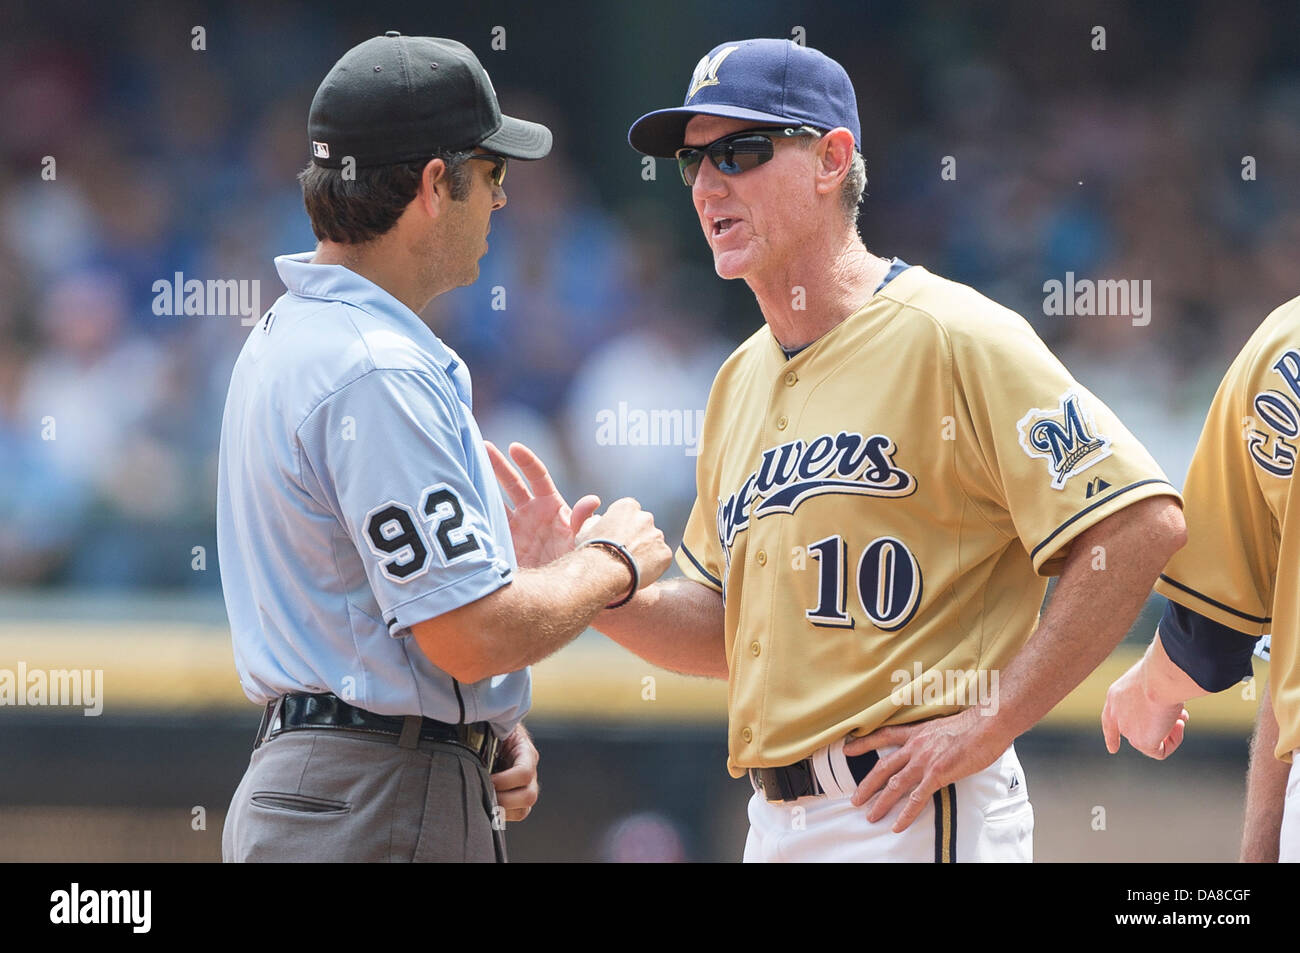 Milwaukee, Wisconsin, USA. 7th July, 2013. July 7, 2013: Milwaukee Brewers manager Ron Roenicke #10 discusses a call with umpire John Hirscbeck during the Major League Baseball game between the Milwaukee Brewers and the New York Mets at Miller Park in Milwaukee, WI. Mets win 2-1. John Fisher/CSM. Credit:  csm/Alamy Live News Stock Photo